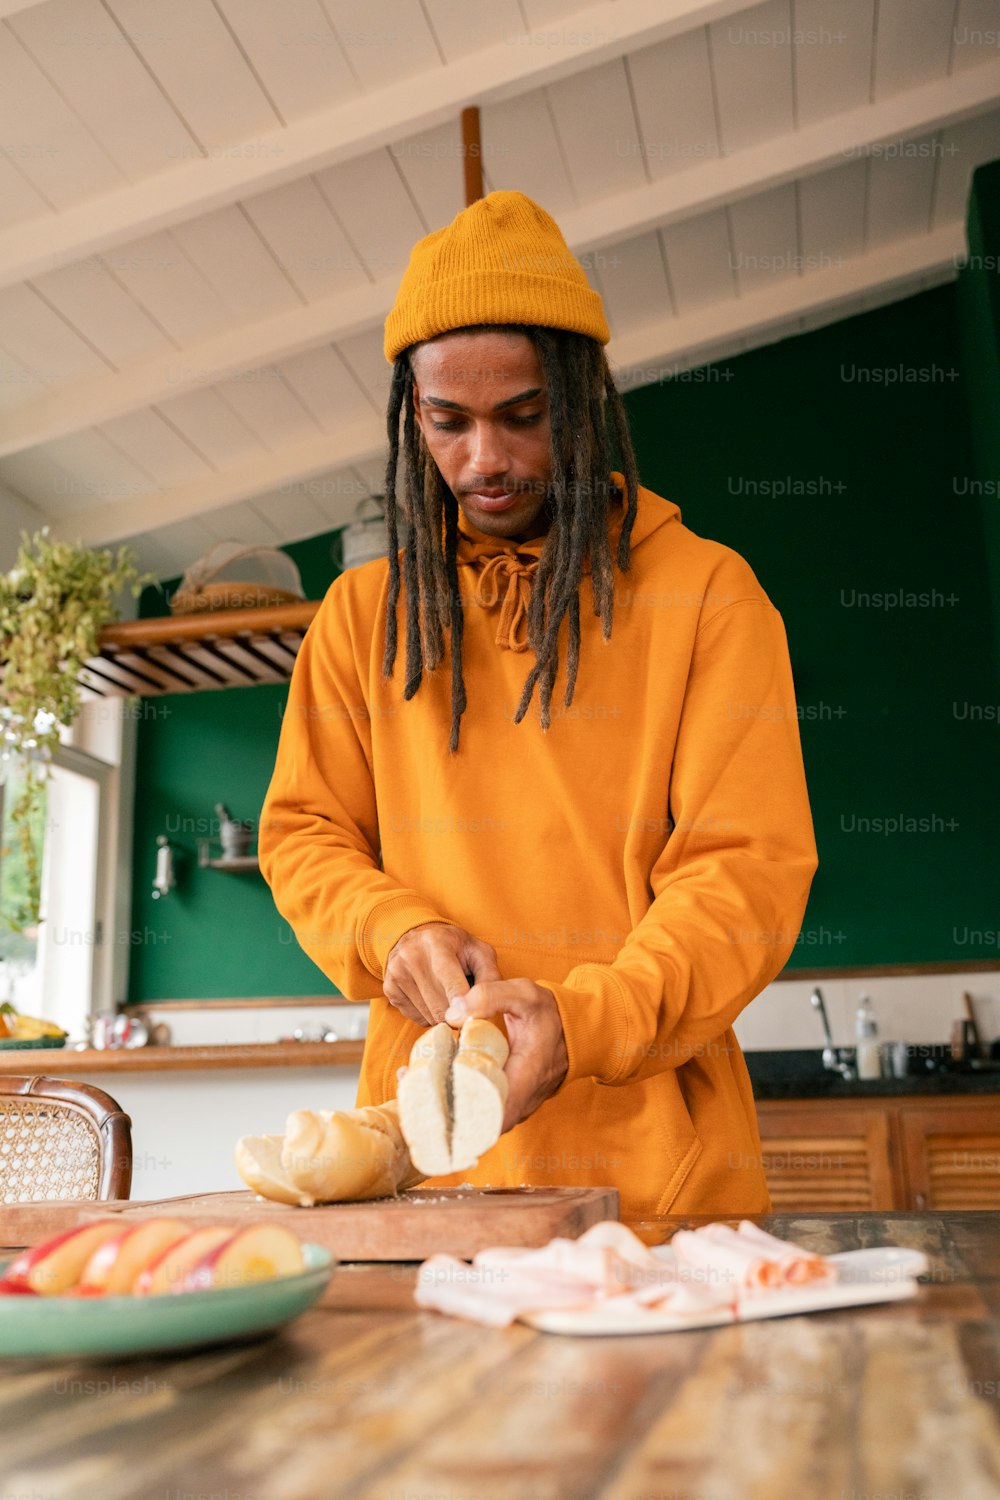 a man with dreadlocks is preparing food on a table